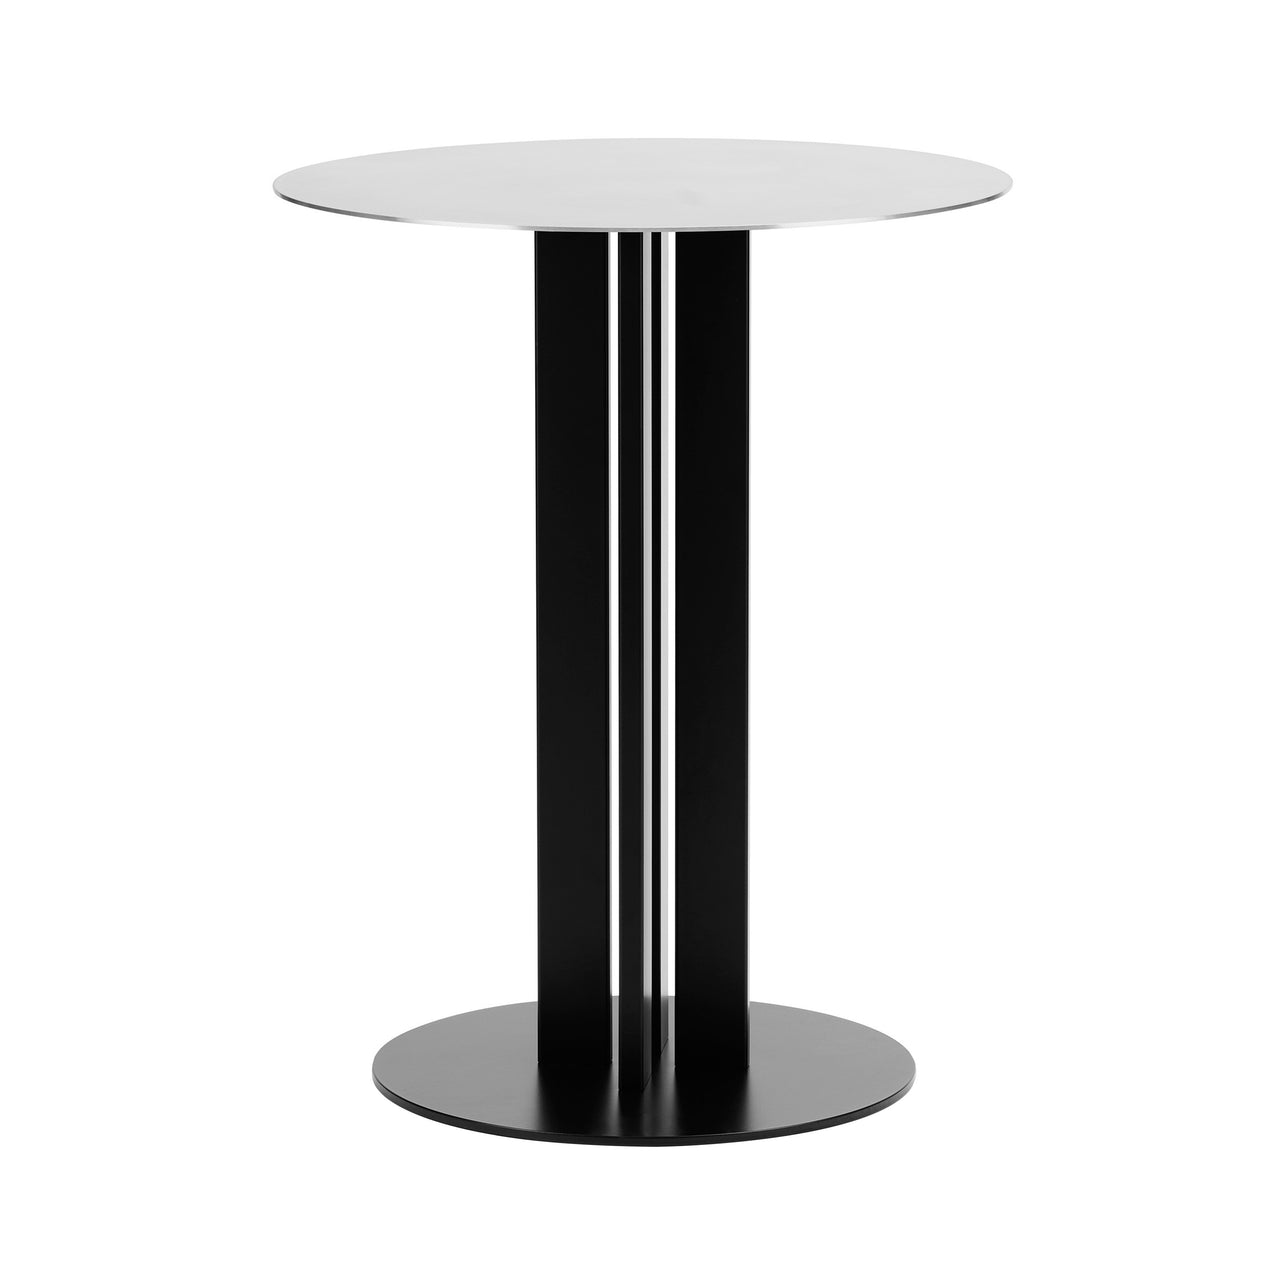 Scala Cafe Table: Small - 23.6